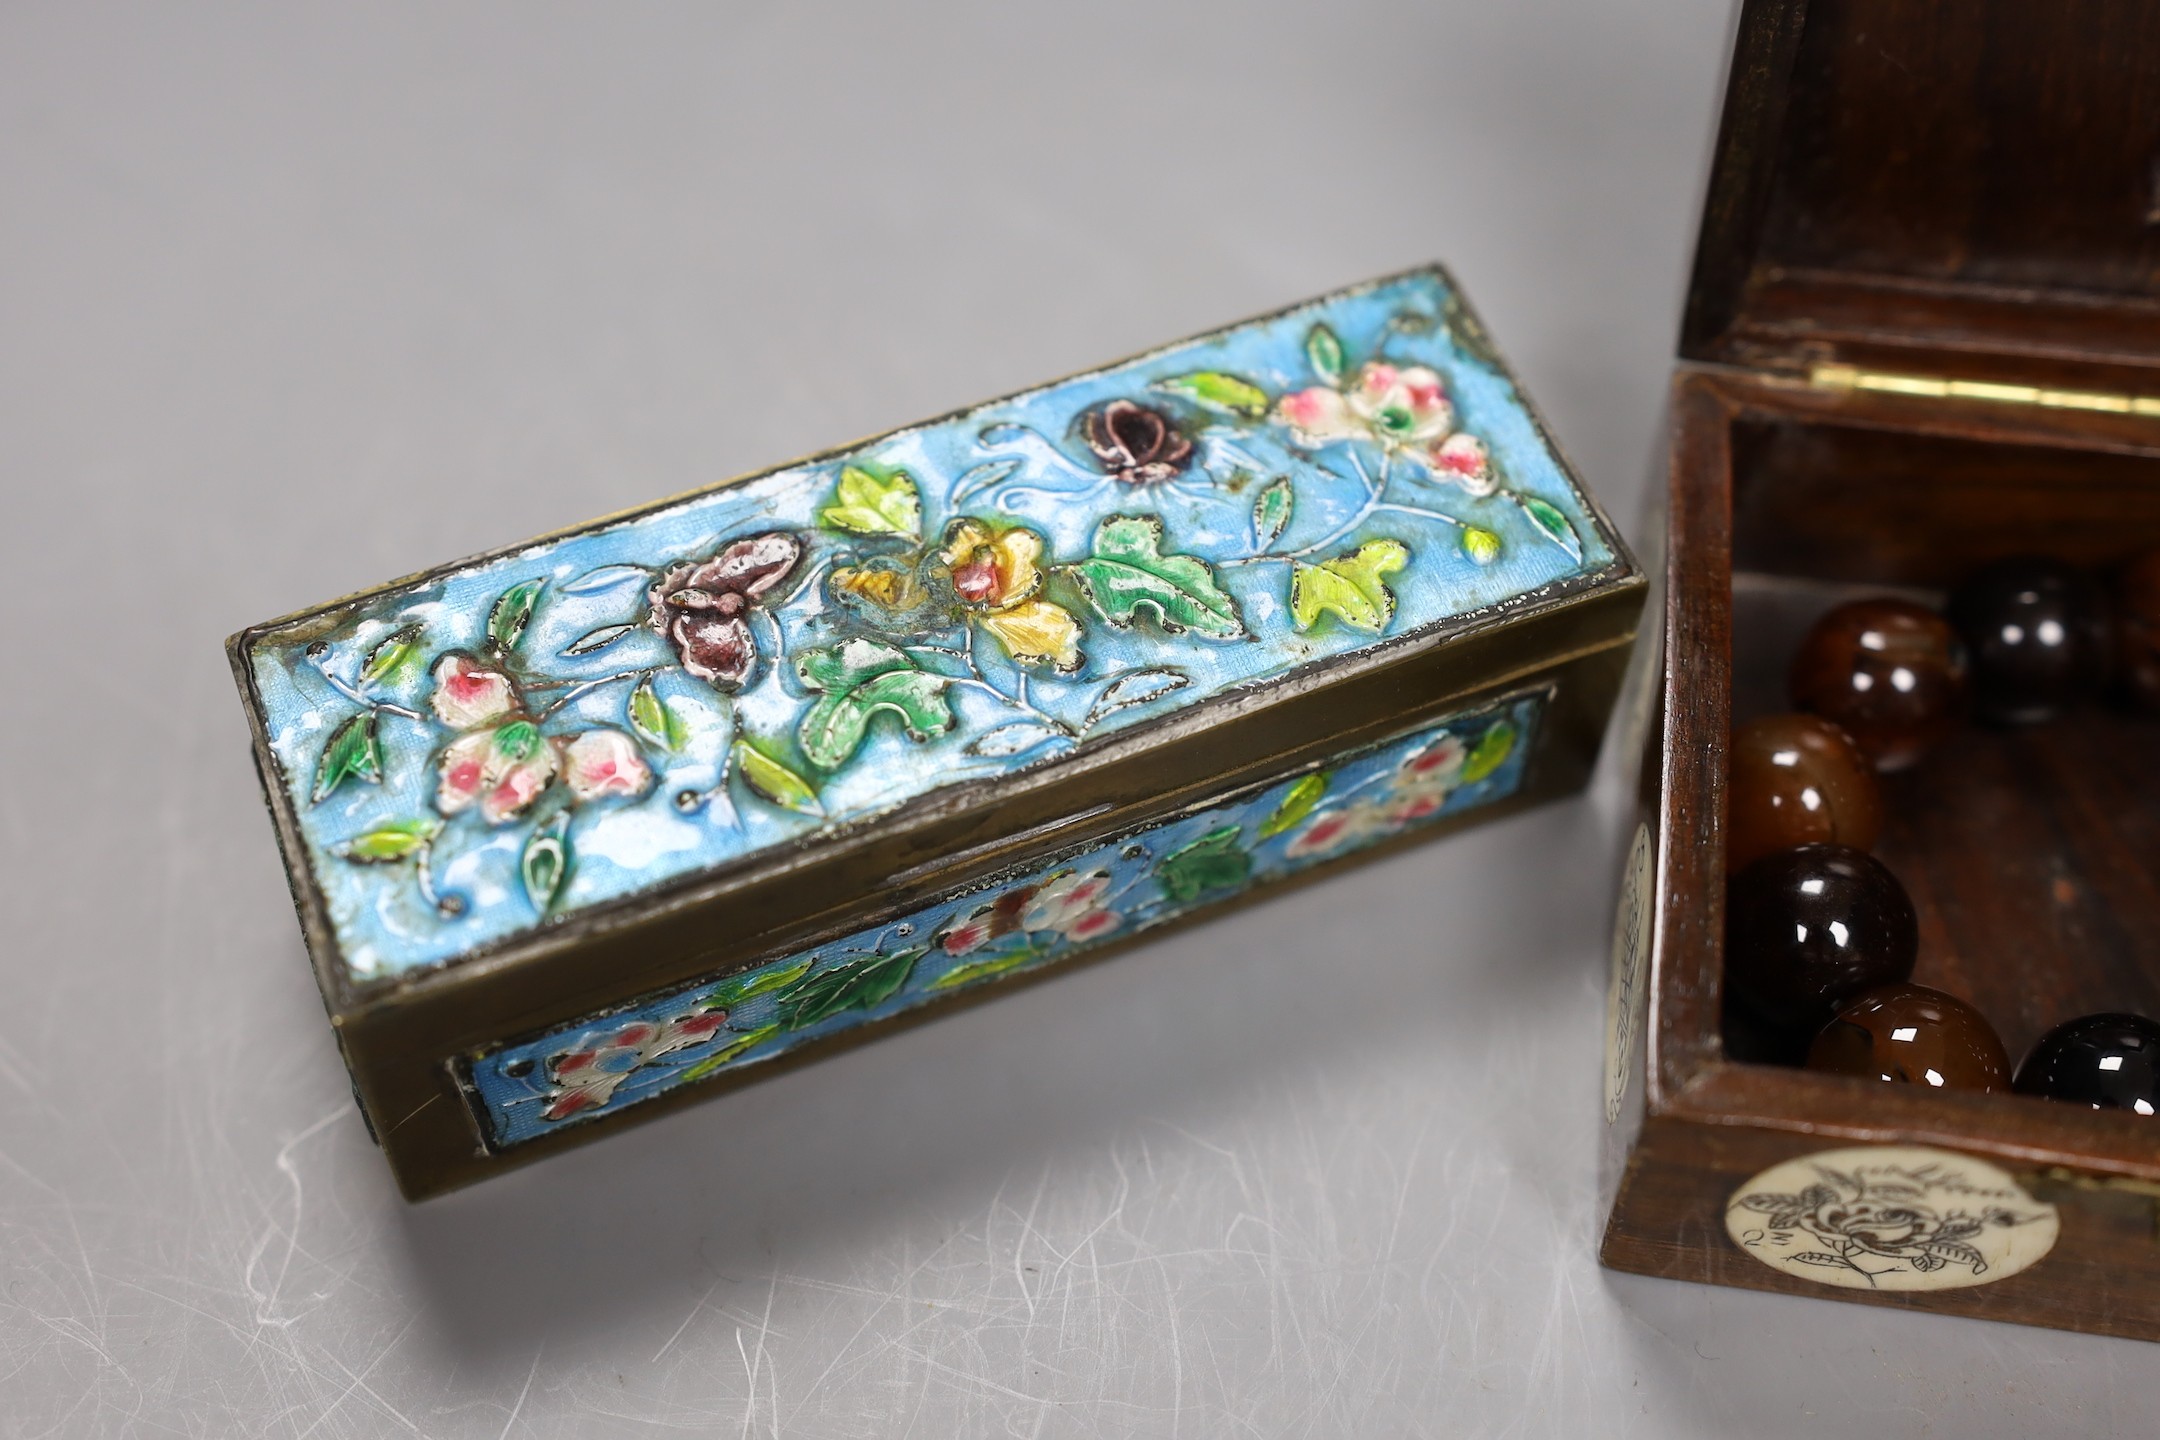 A Chinese enamel on brass stamp box, a Tibetan amulet, an agate bead rosary and a bone inlaid box and cove(4), Enamel box, 11 cms x 3.5cms high